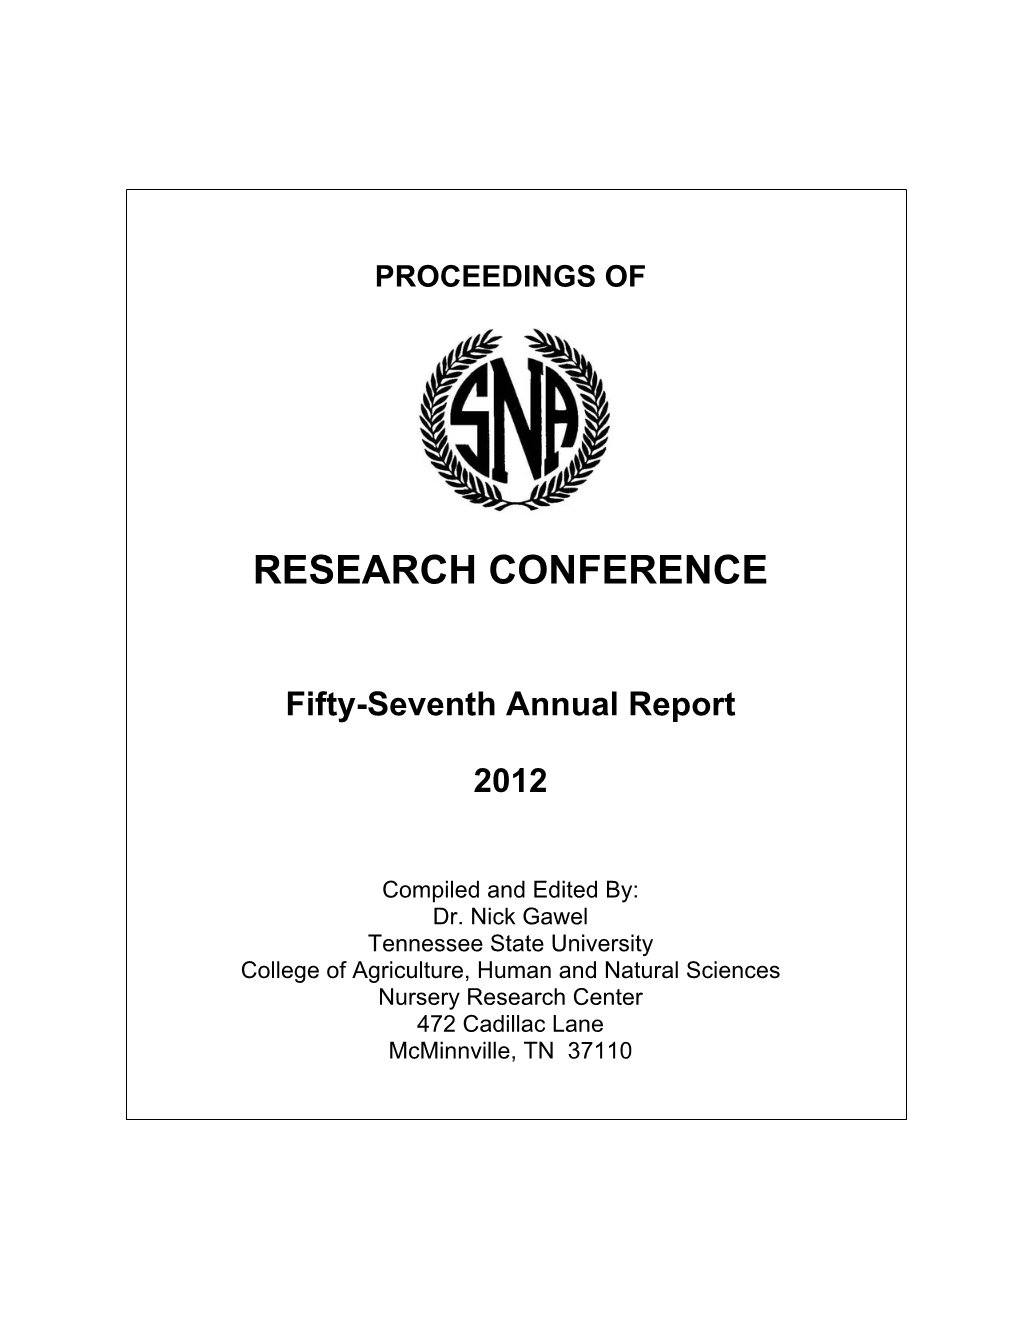 Research Conference